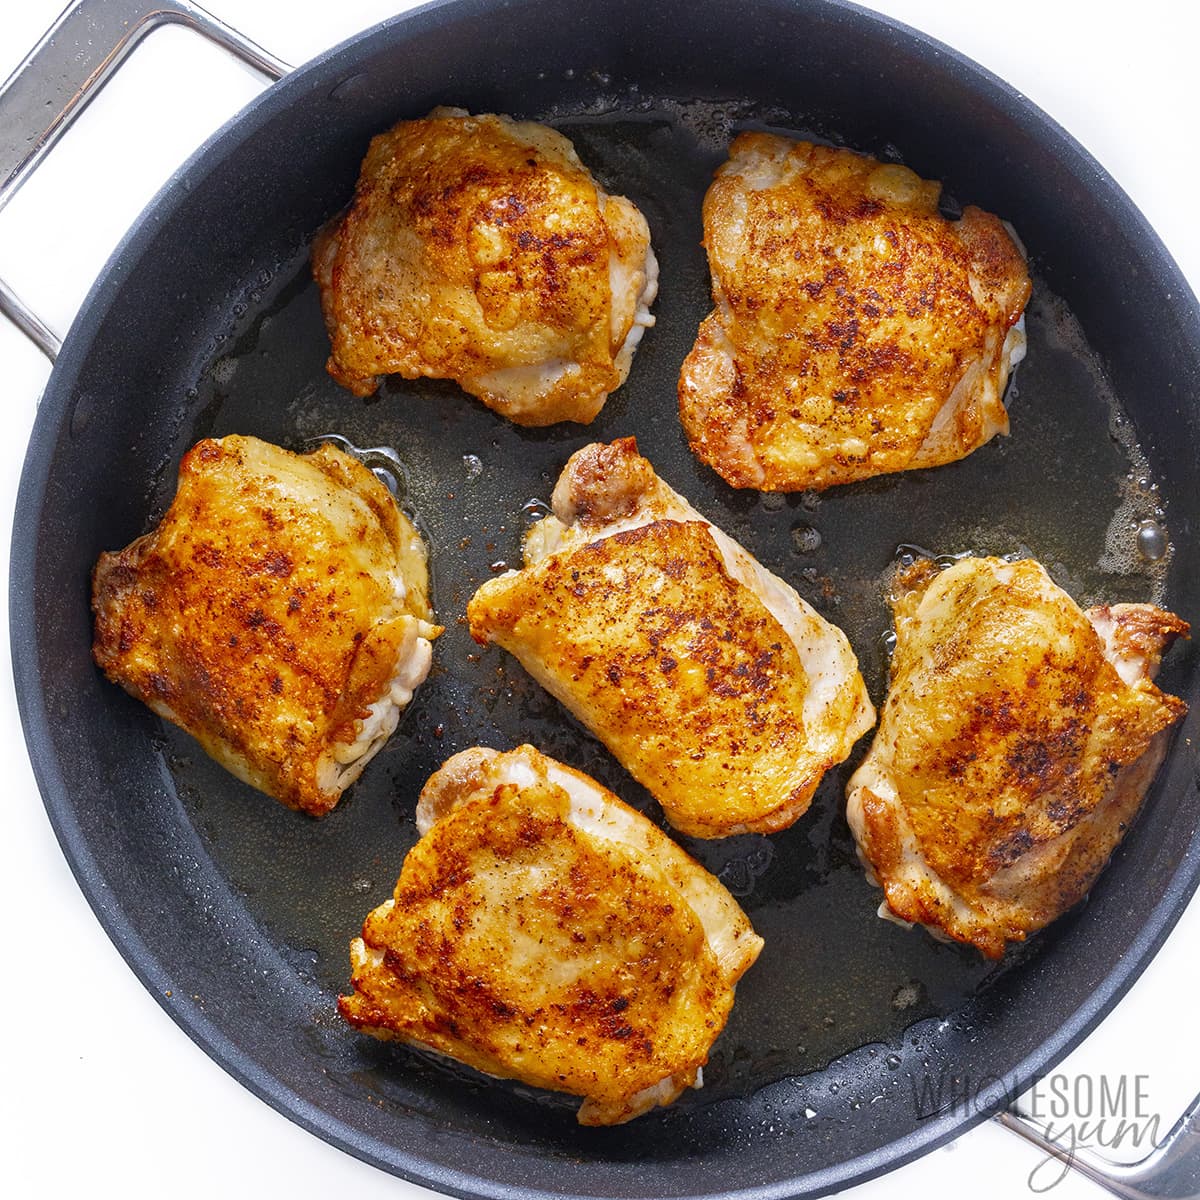 Pan fried chicken thighs in skillet.